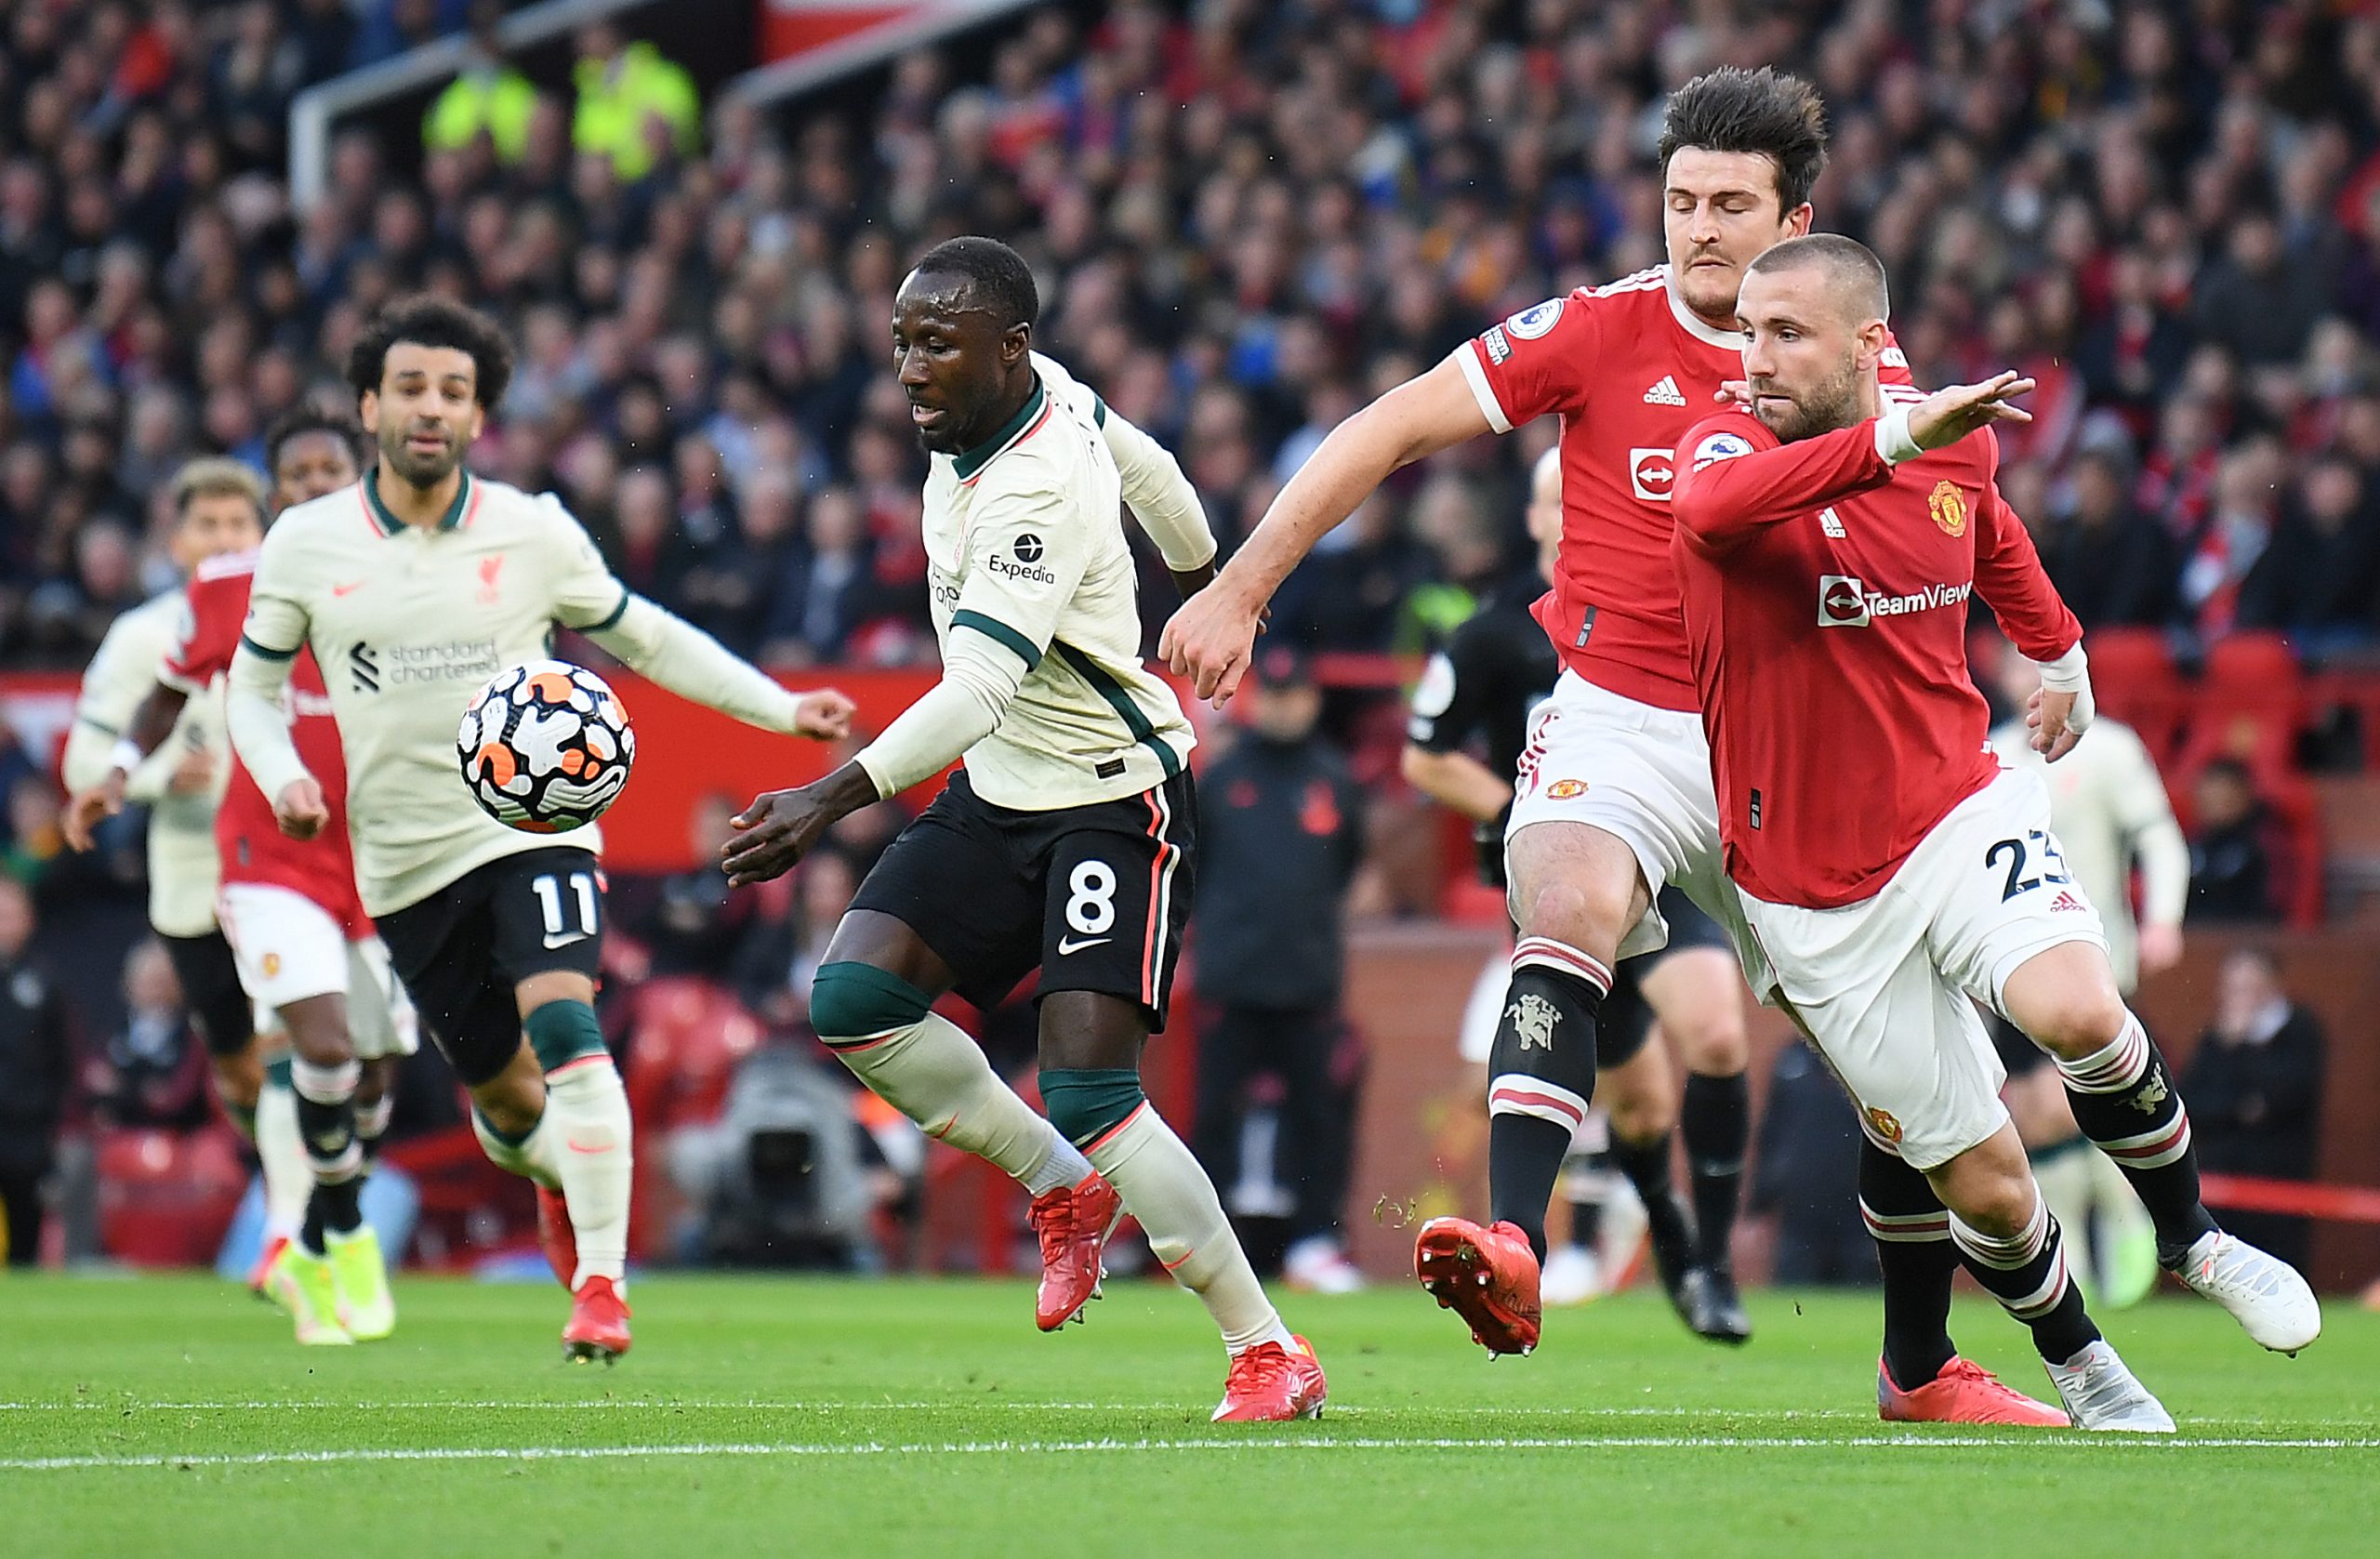 Manchester United duo Luke Shaw and Harry Maguire suffer contrasting fortunes in England-Germany draw.